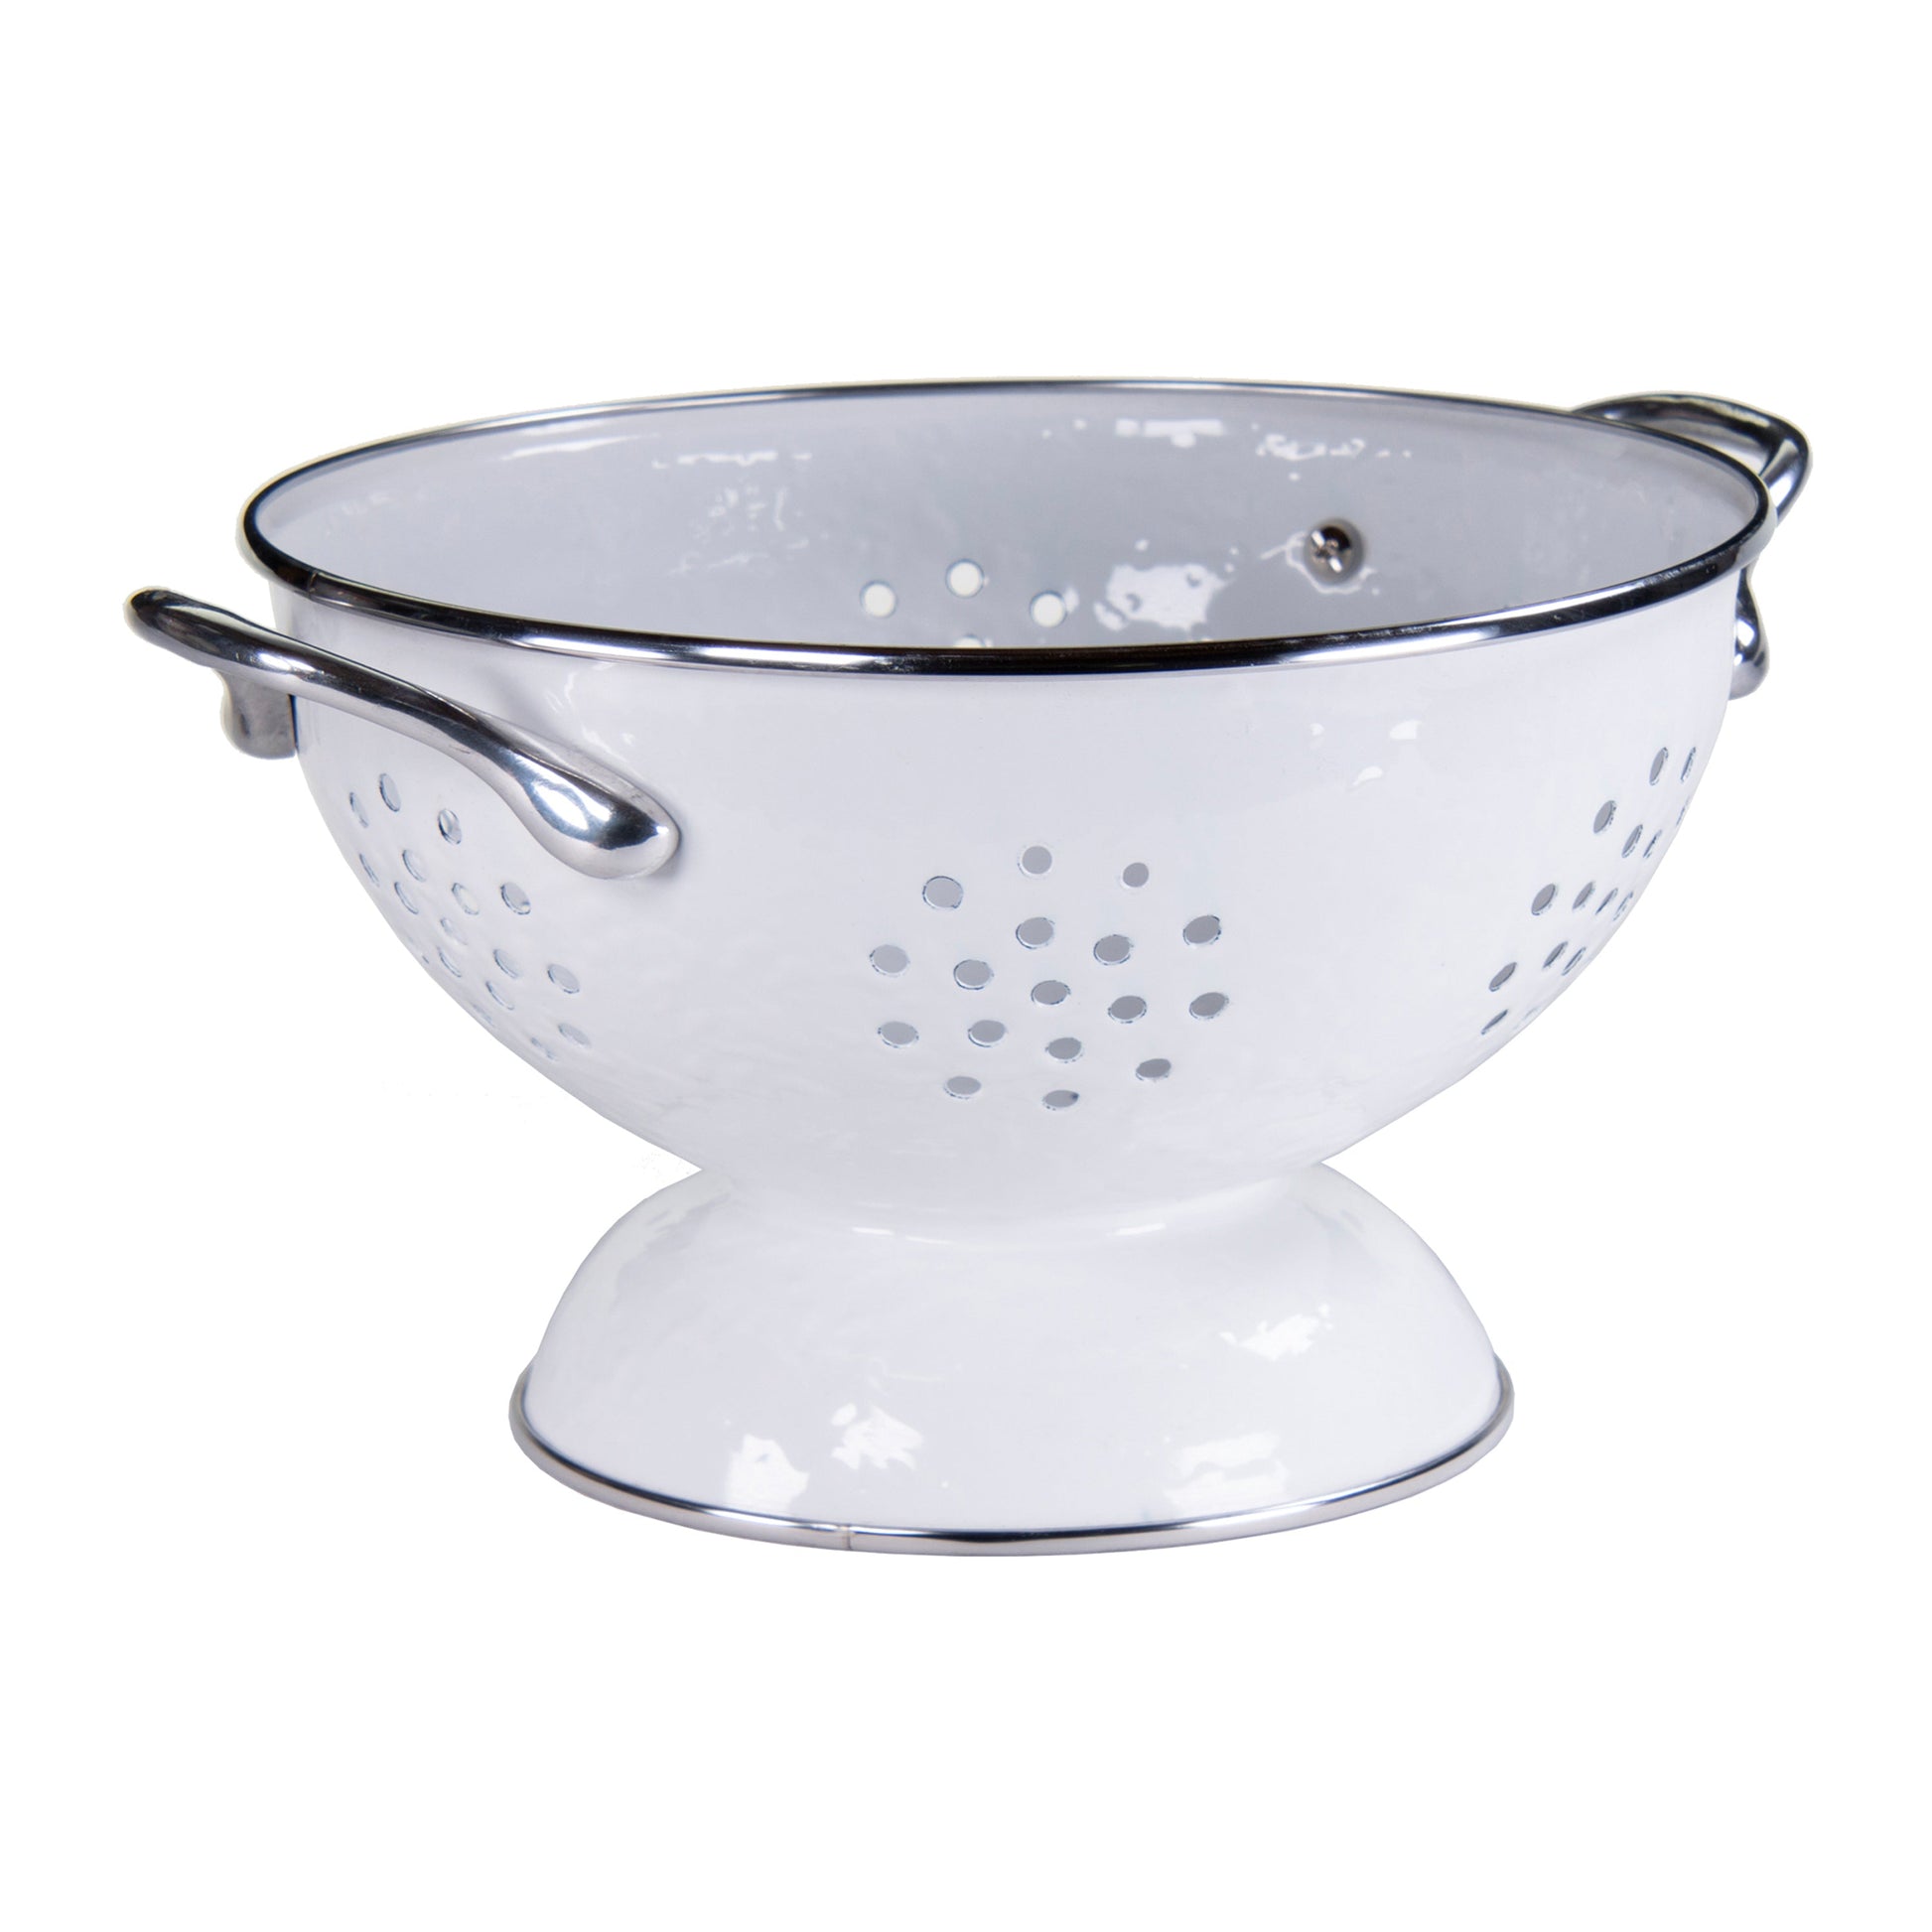 Enamel Colander-Colanders & Strainers-Nautical Decor and Gifts